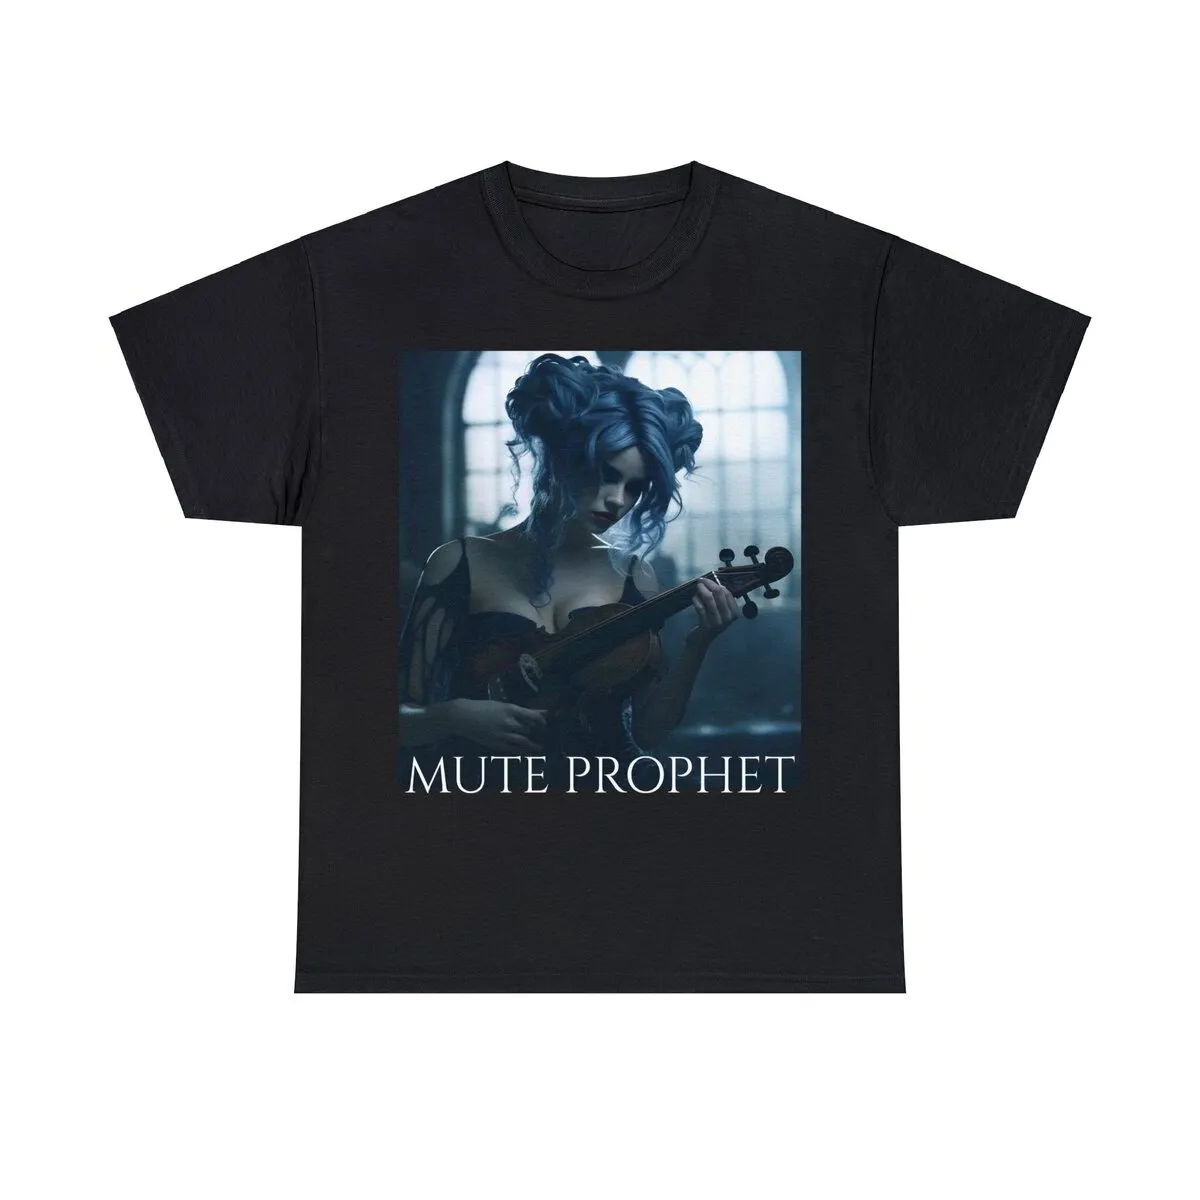 "The Violinist" T-Shirt